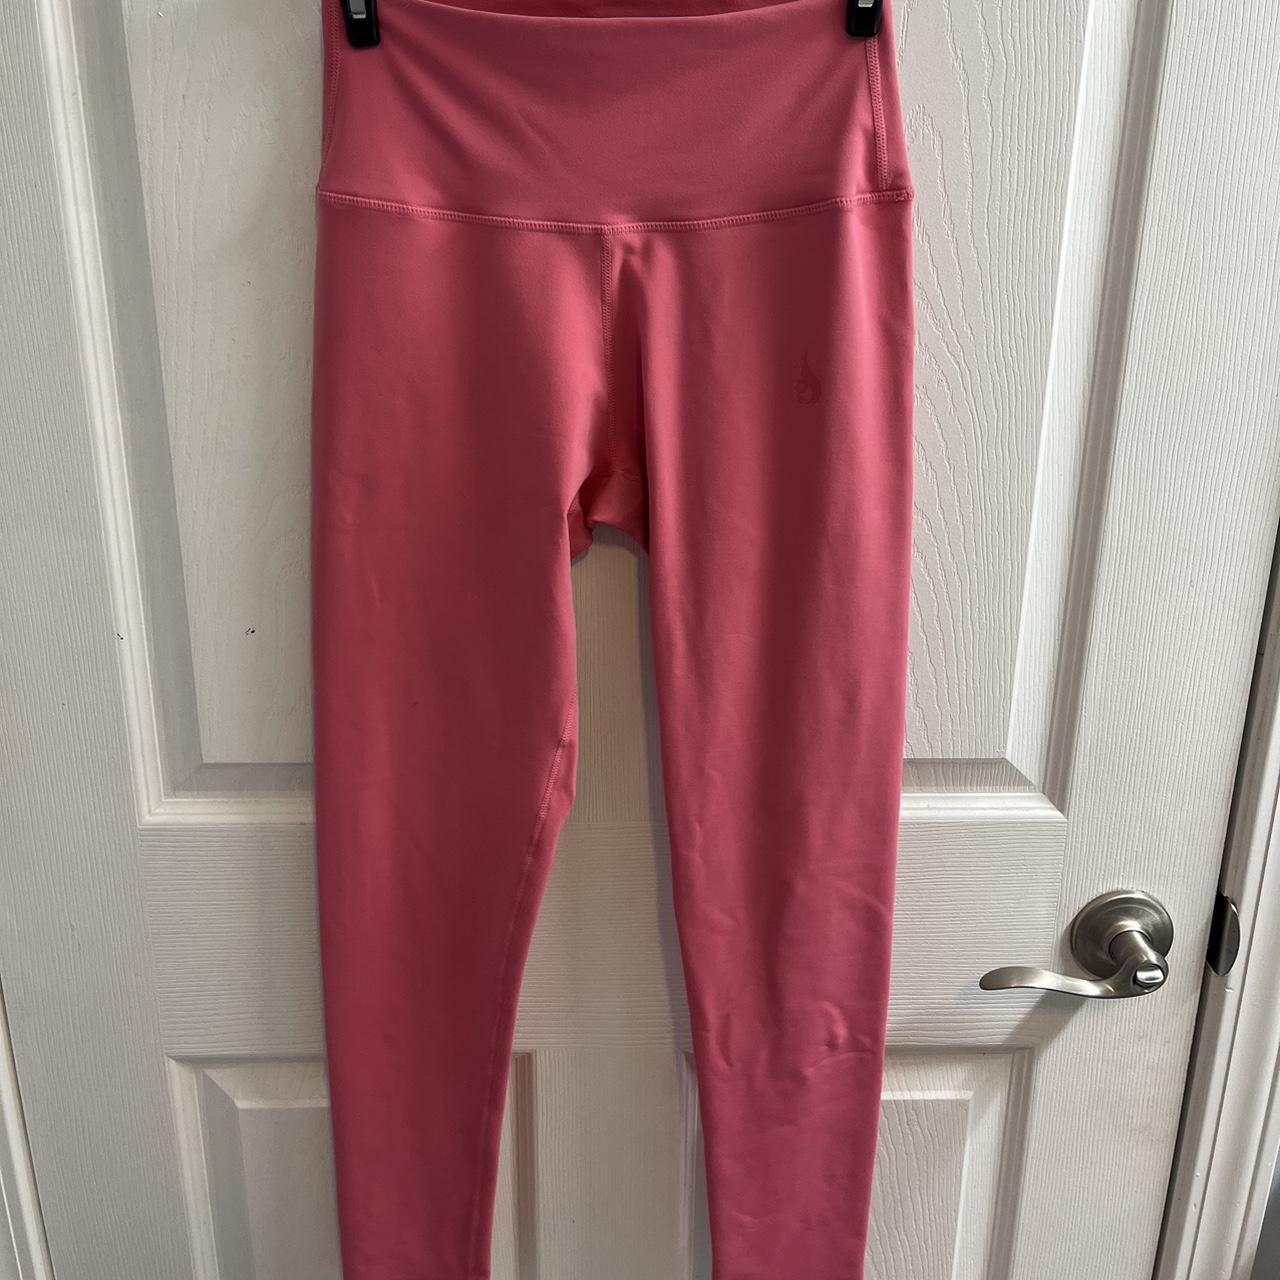 Small Pink workout leggings